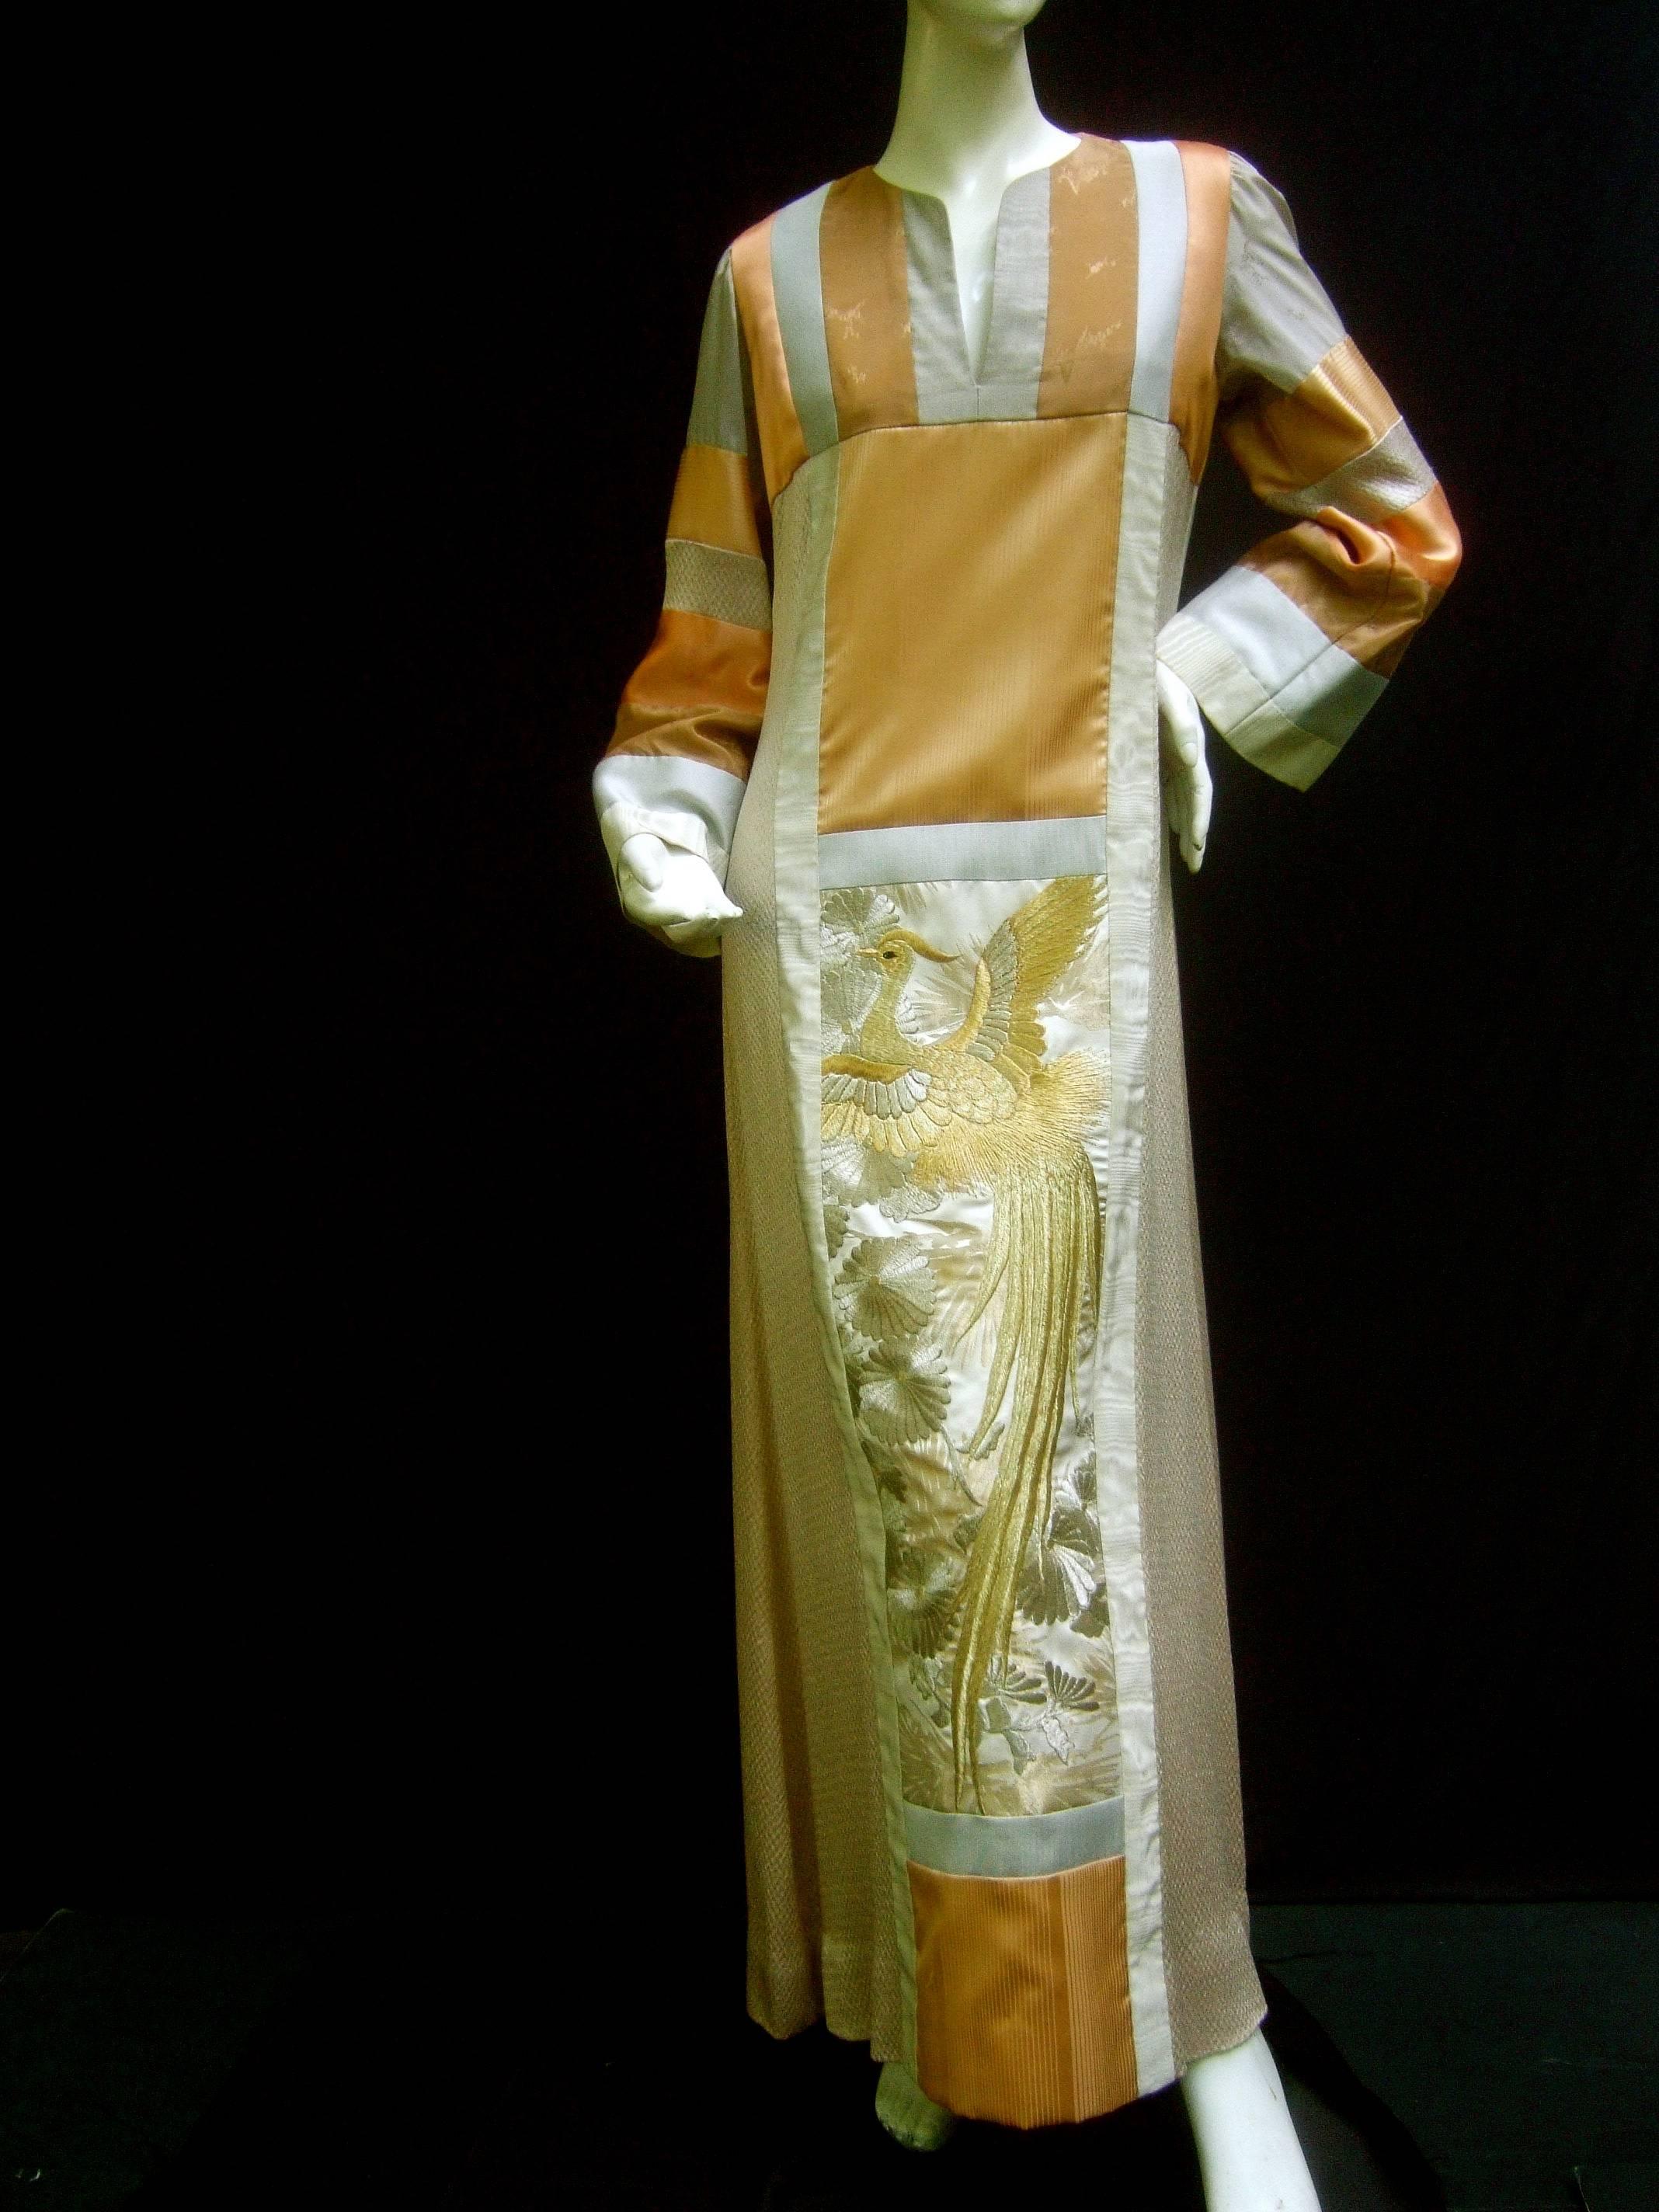 Stunning rare Japanese style caftan gown by Jon Shannon c 1970s
The opulent caftan is designed with color block panels 
in soothing earth tone hues 

The lower front section is embellished with an elaborate exotic
bird in gold metallic thread;